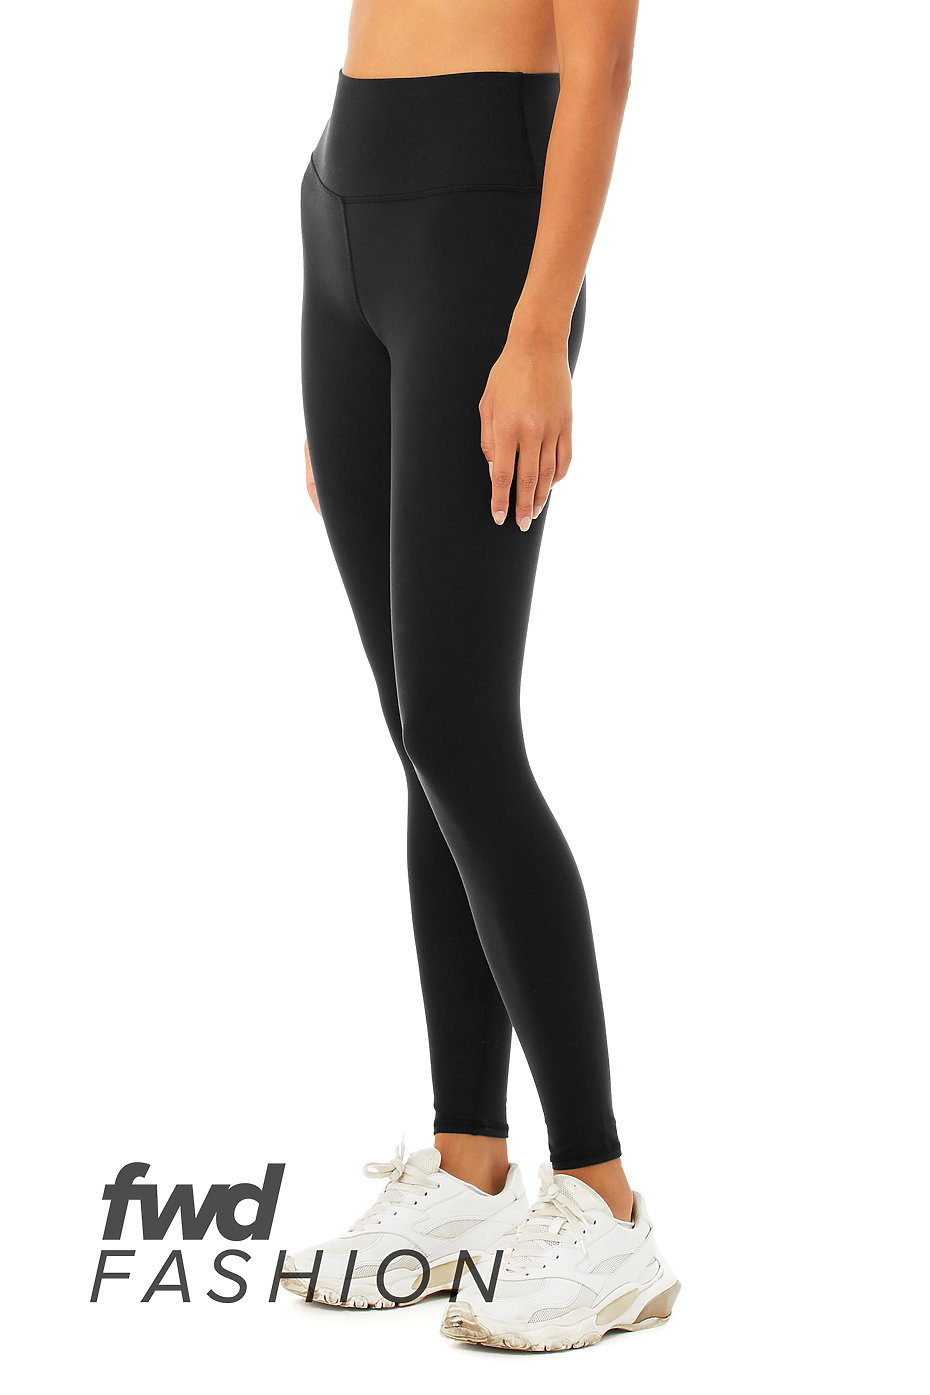 Details about   Women High Waisted Leggings